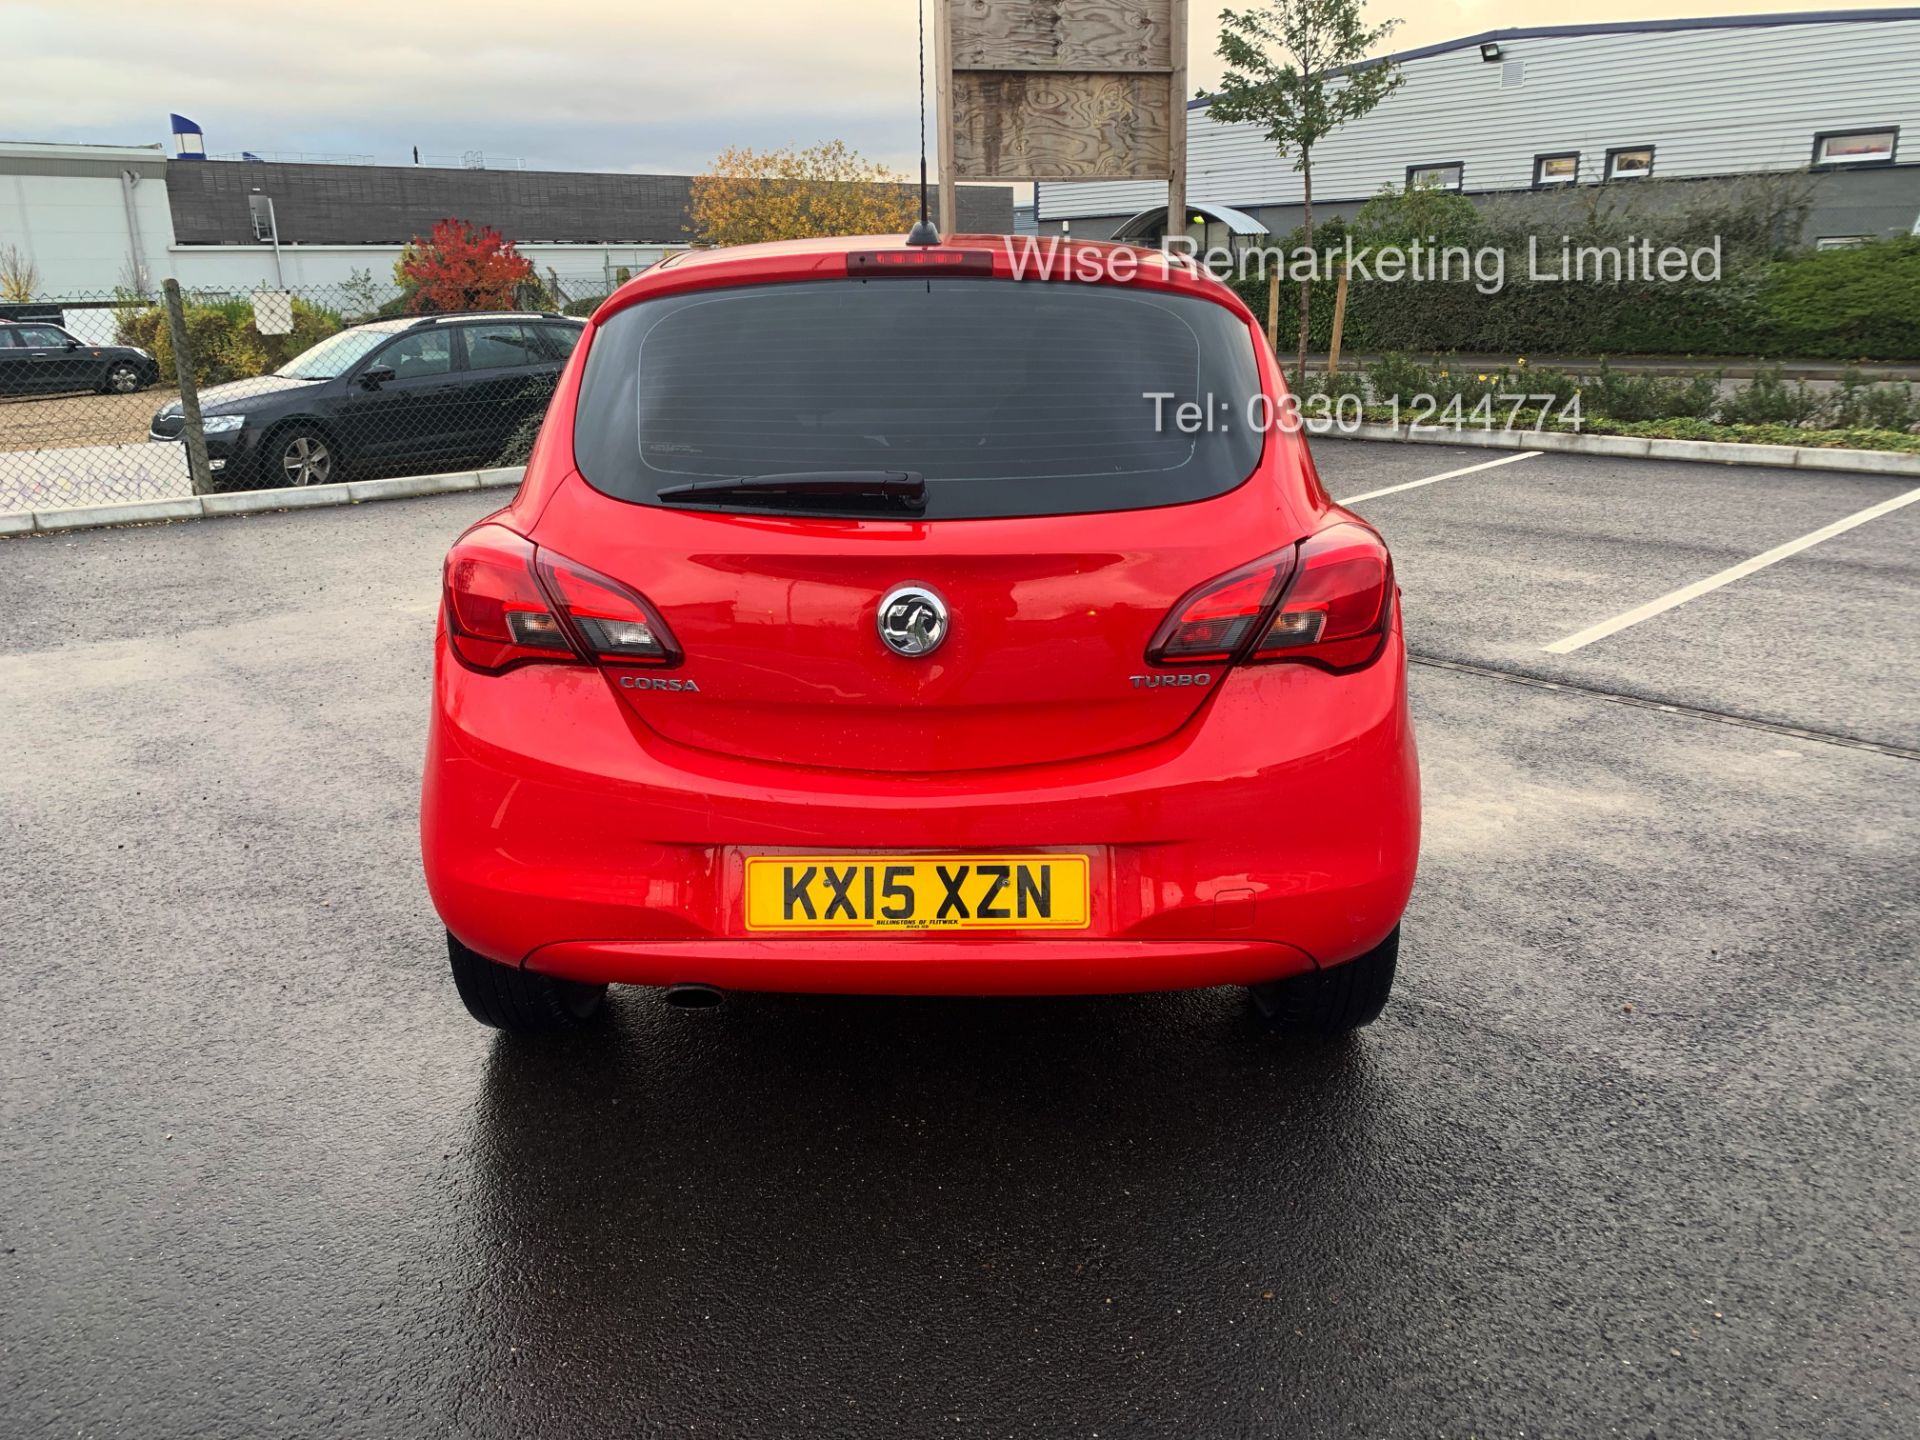 Vauxhall Corsa 1.4 Turbo Excite AC Ecoflex - 2015 15 Reg - Heated Seats - Touch Screen **TOP SPEC** - Image 4 of 22